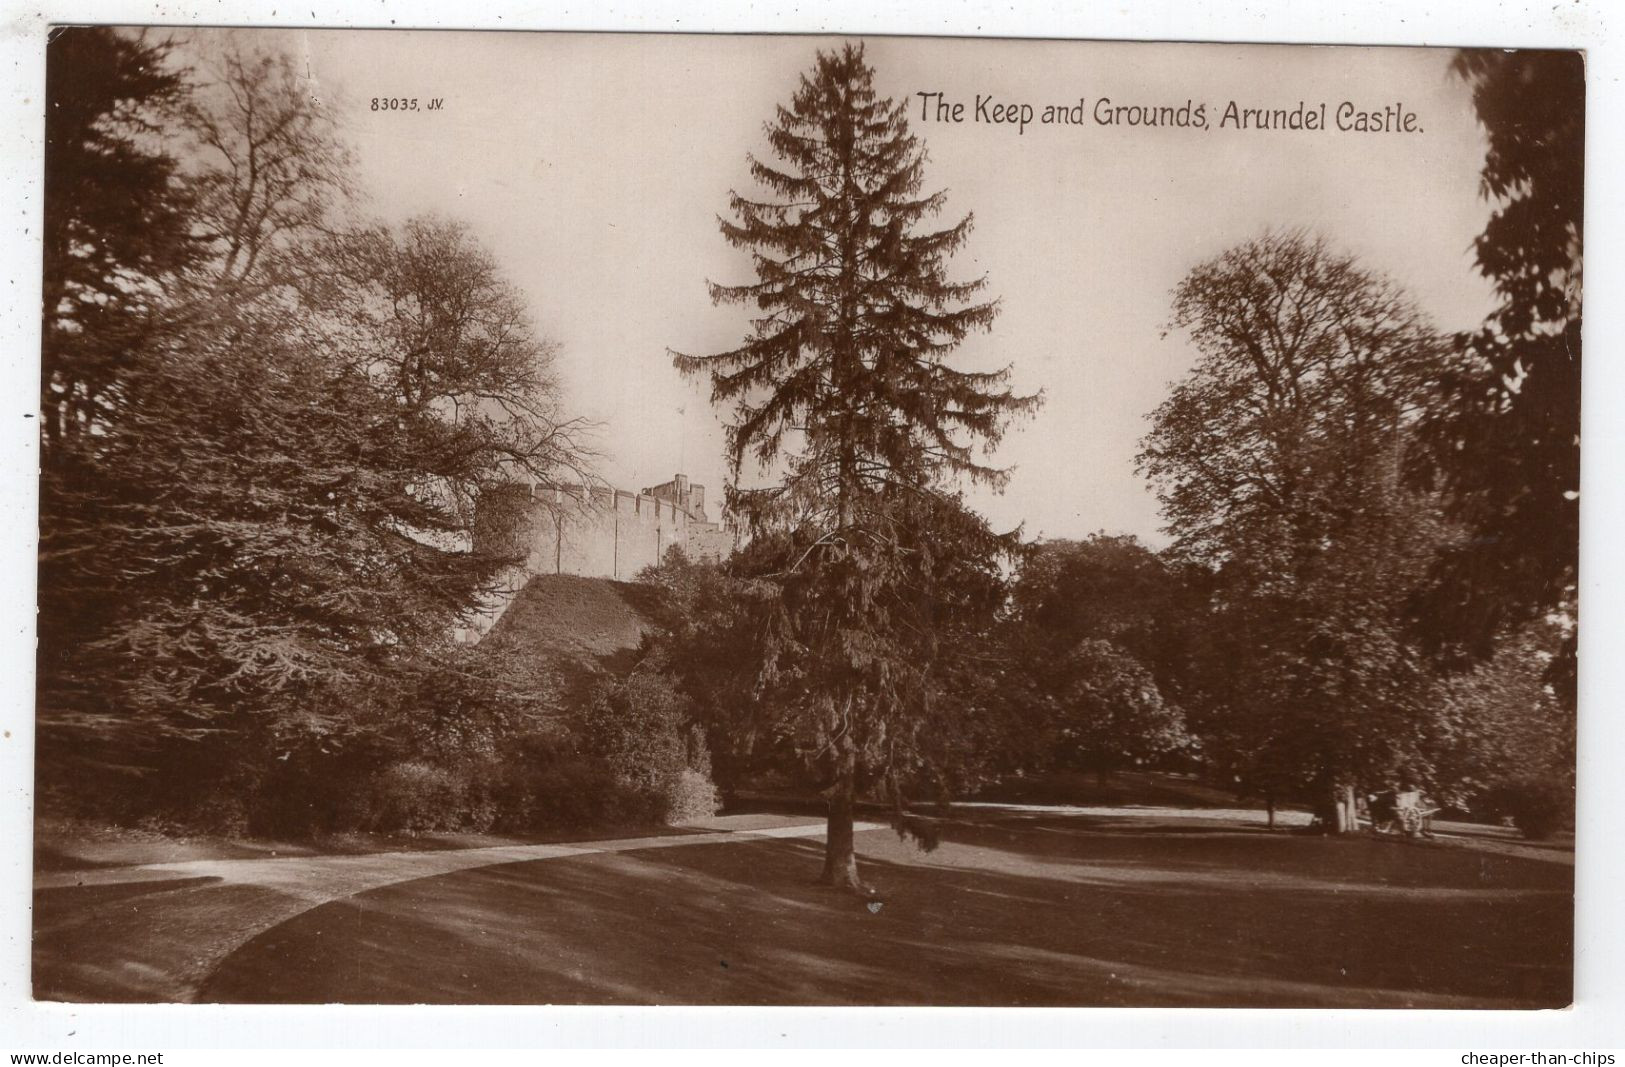 ARUNDEL - The Keep And Castle Grounds - Valentine 83035 - Photographic Card - Arundel